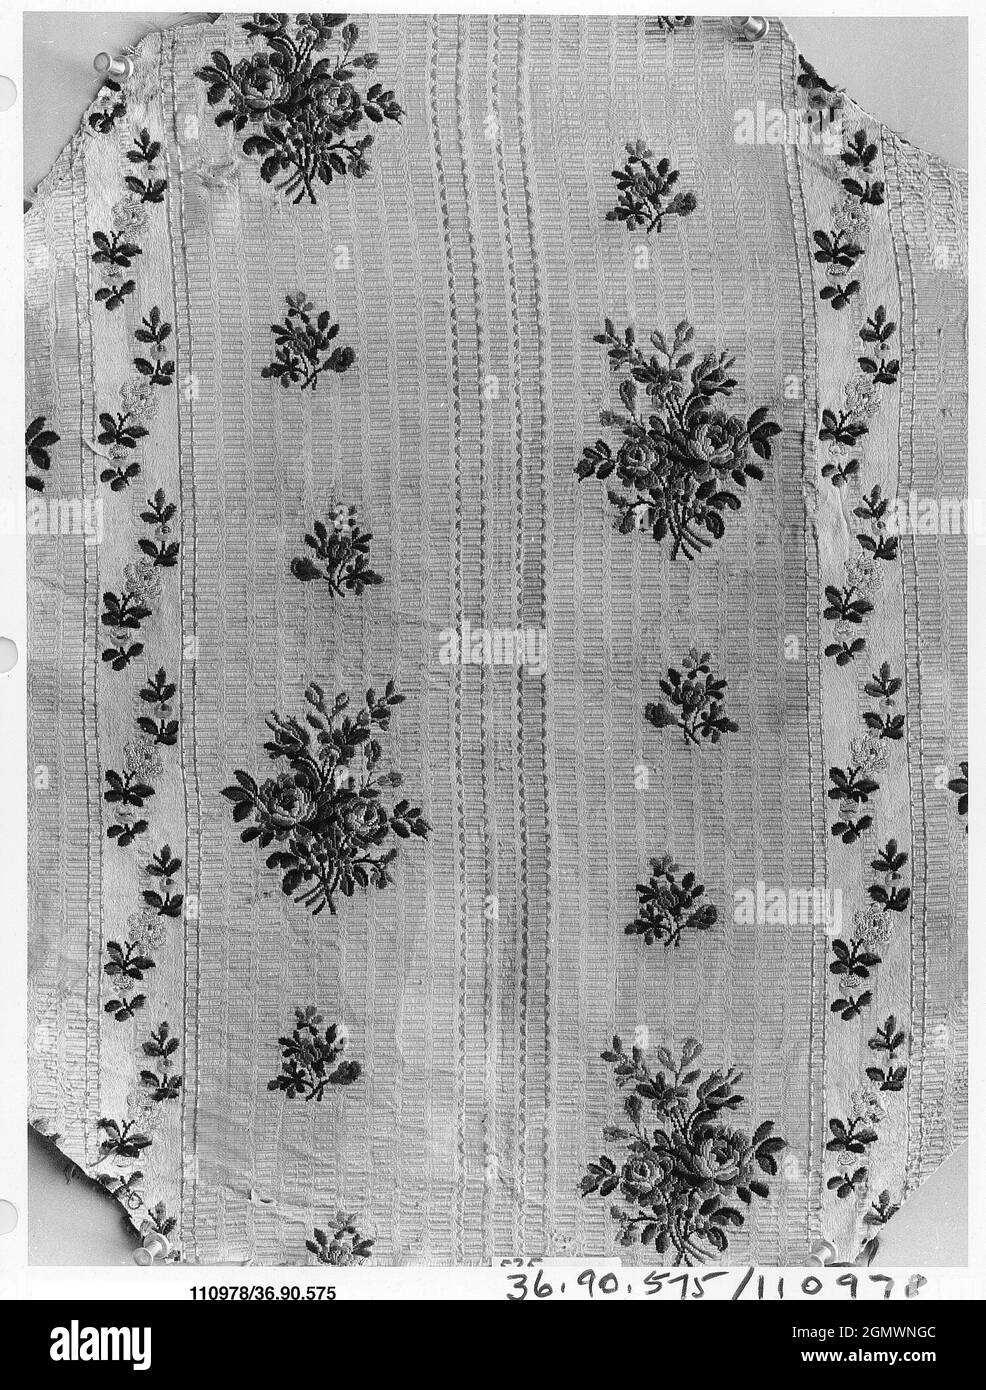 Piece. Date: 18th century; Culture: French; Medium: Silk; Dimensions: L. 19 x W. 18 inches; Classification: Textiles-Woven Stock Photo